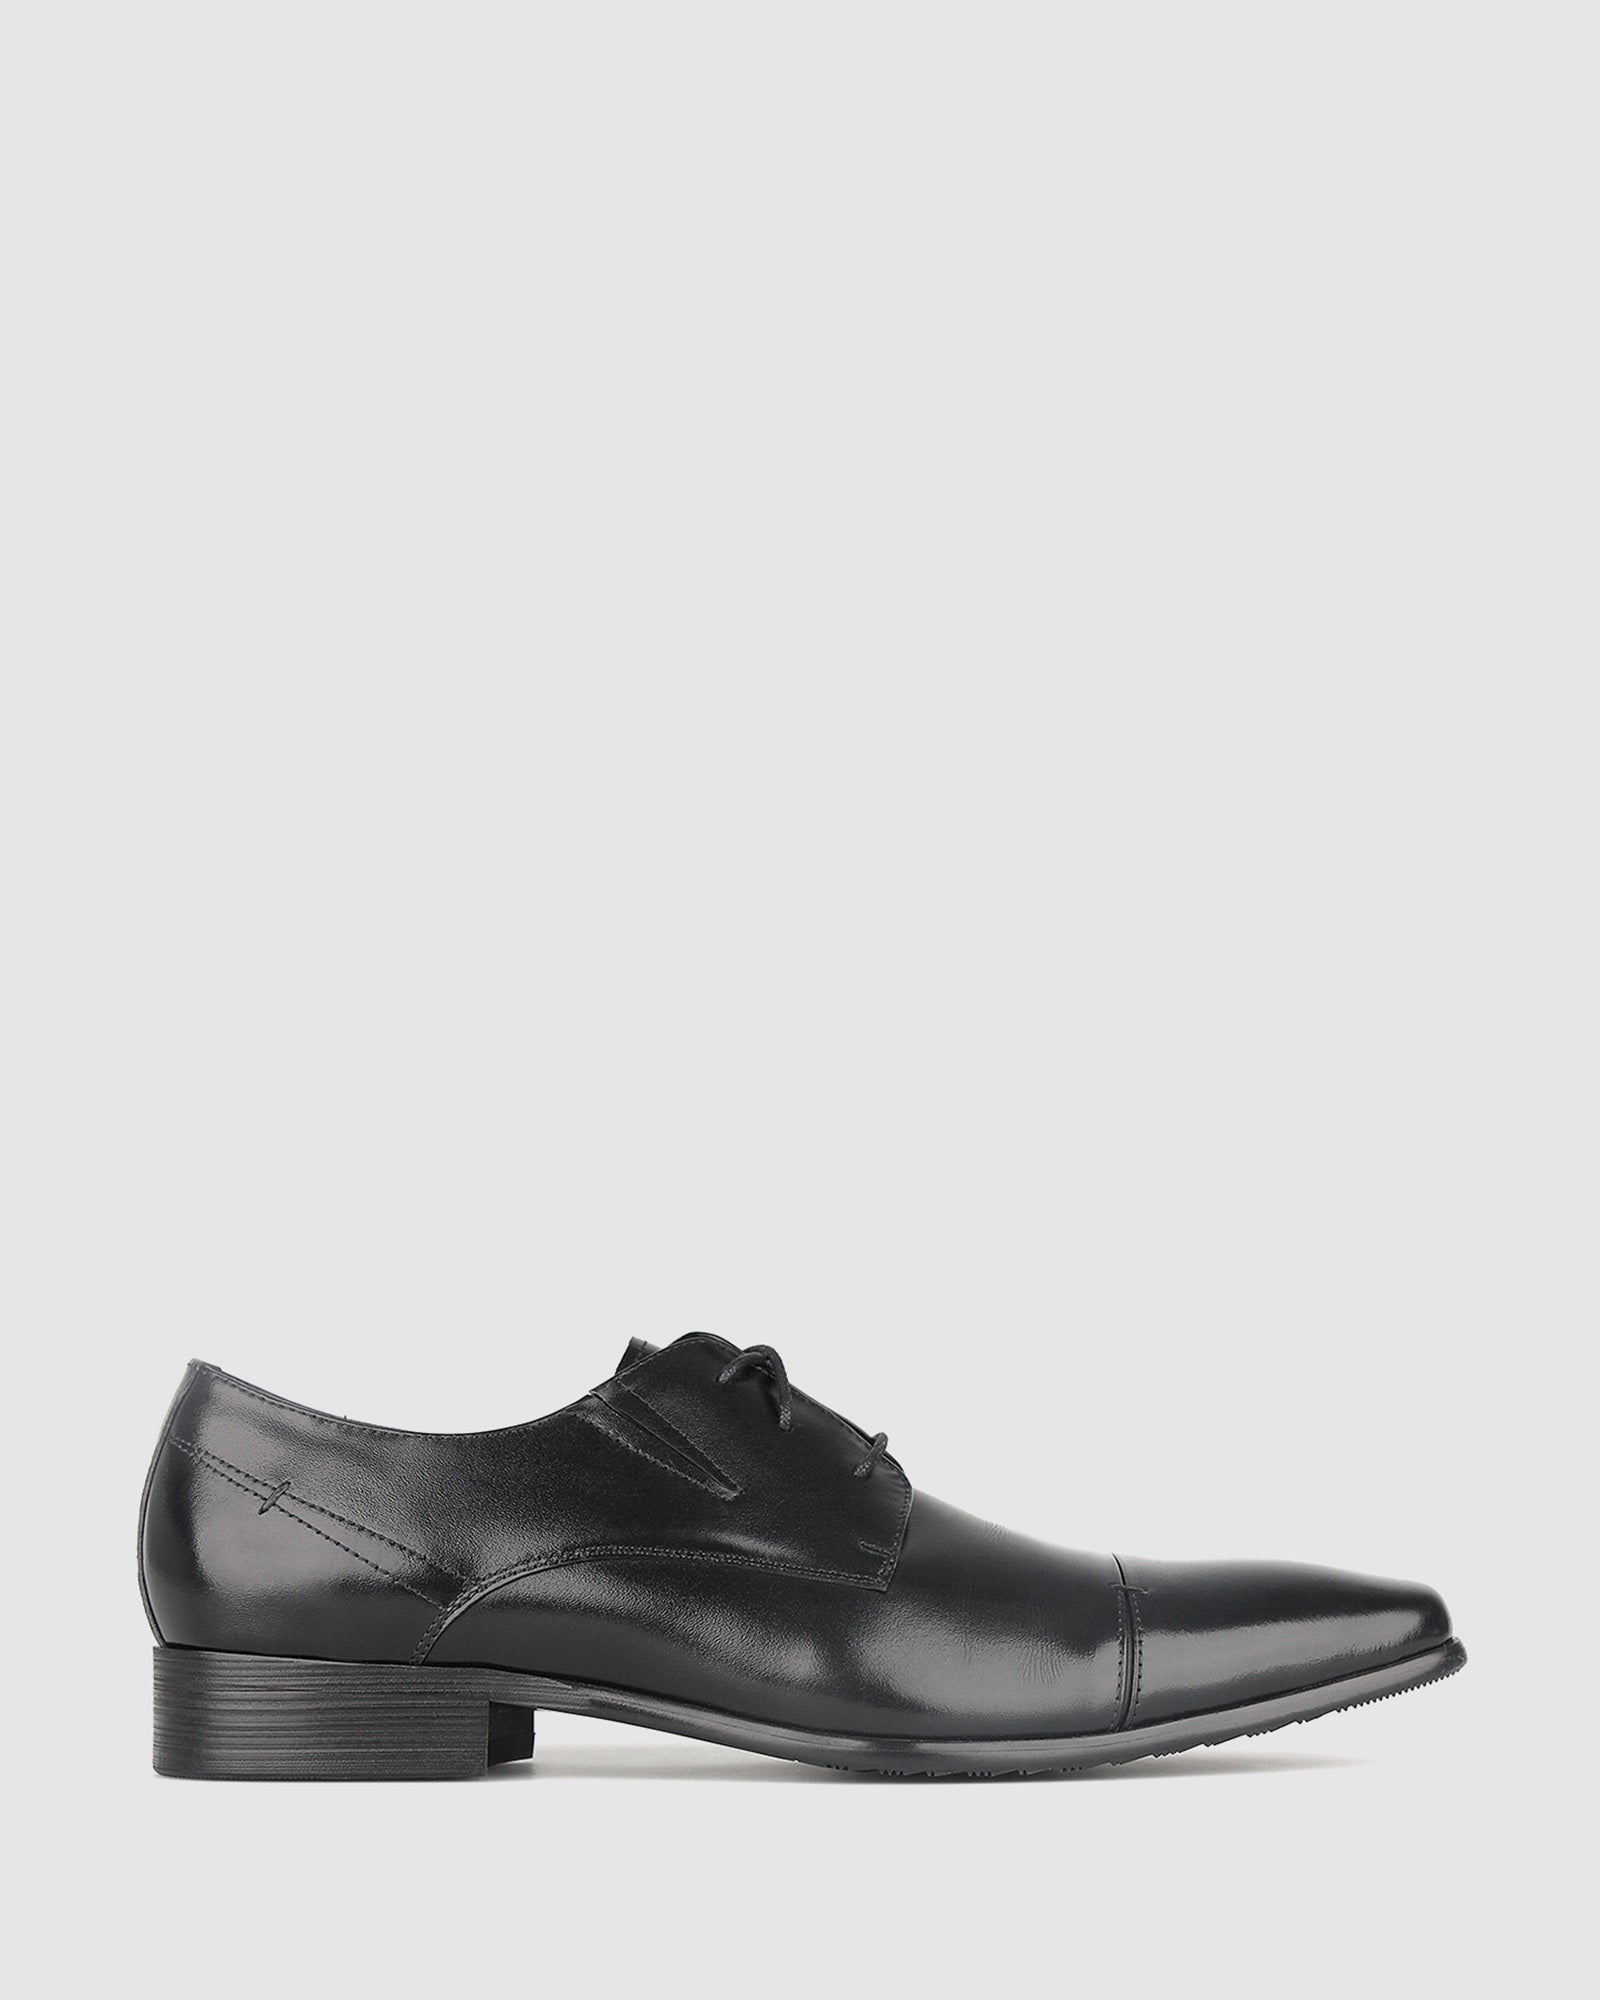 Buy DEFIANT Leather Dress Shoes by Airflex online - Betts